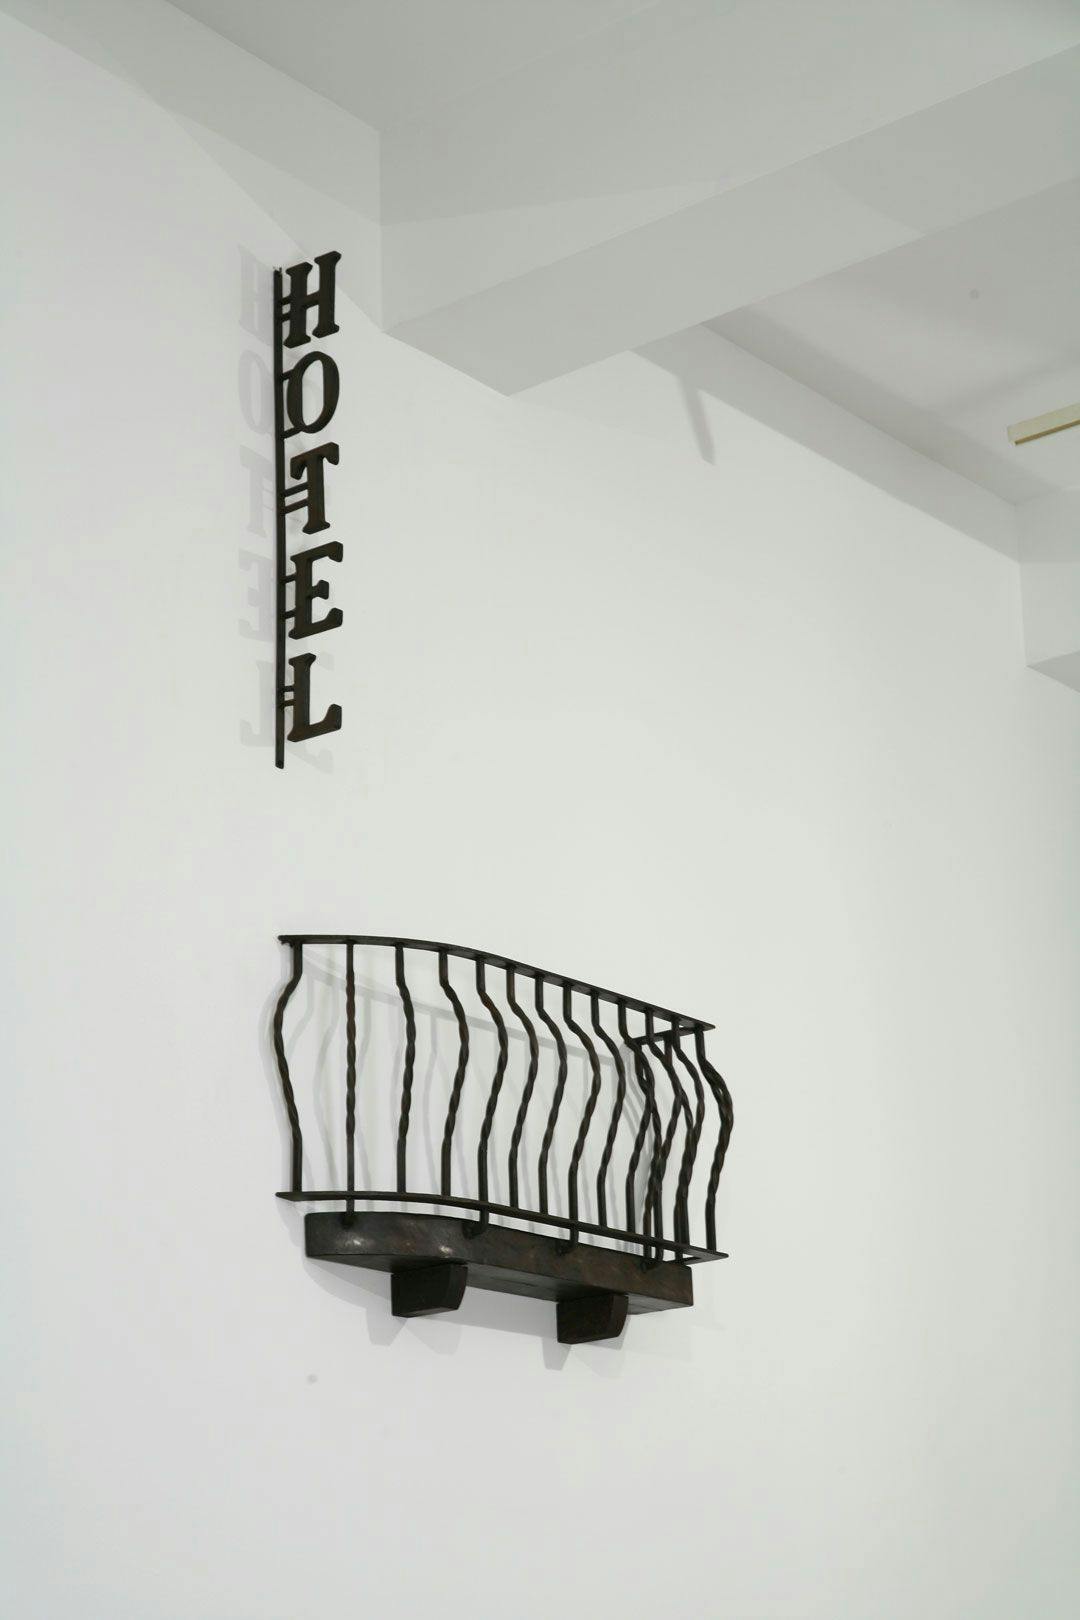 A wall-hanging sculpture by Juan Muñoz, titled Hotel DeClercq II, dated 1986, at Marian Goodman Gallery, New York, in 2006.